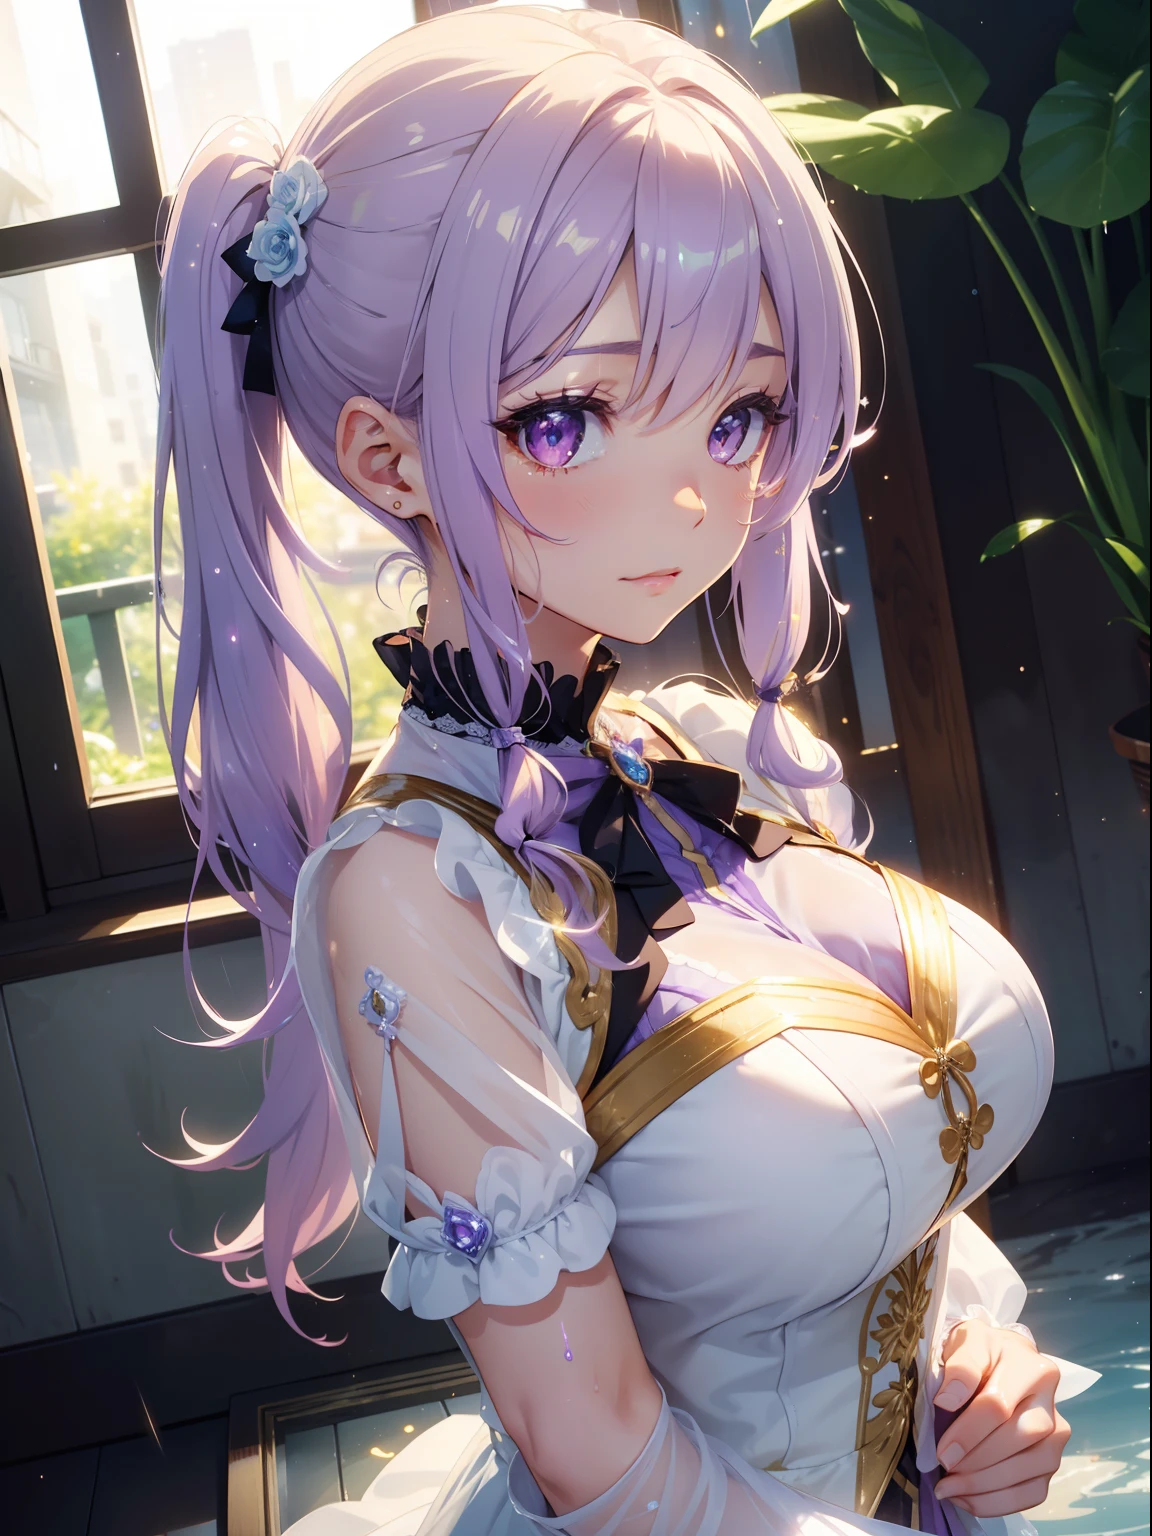 masutepiece, High resolution, 8k, anime woman, Delicate and detailed writing 、Detailed digital illustration、(((Straight pigtail)))、Shiny hair、bangs、a very beautiful woman、Eyes are double, Large, ((Bust is an A cup))、High image quality, High quality、Detailed background、(((Wearing cute idol clothes in white and lilac)))、((Very heavy rain、early evening))、Drops are falling on the hair、Wet hair、Clothes are also wet、The inside of the eye shines like a diamond、Light purple hair、Gradient pupil、(((2 arms、4 fingers, 1 thumb)))、Detailed female face、Very beautiful and cute woman、、Detailed background、​masterpiece、Soft Focus , Bright gradient watercolor , Lens Flare , (((glitter))) , Glow , Dreamy , Light Purple Ribbon、Very Beautiful Light Purple Rose Hair Accessories、Light purple and gold costume with white as the main color、((Straight at the angle of the front))、clothes wet、Clothes are wet and you can move